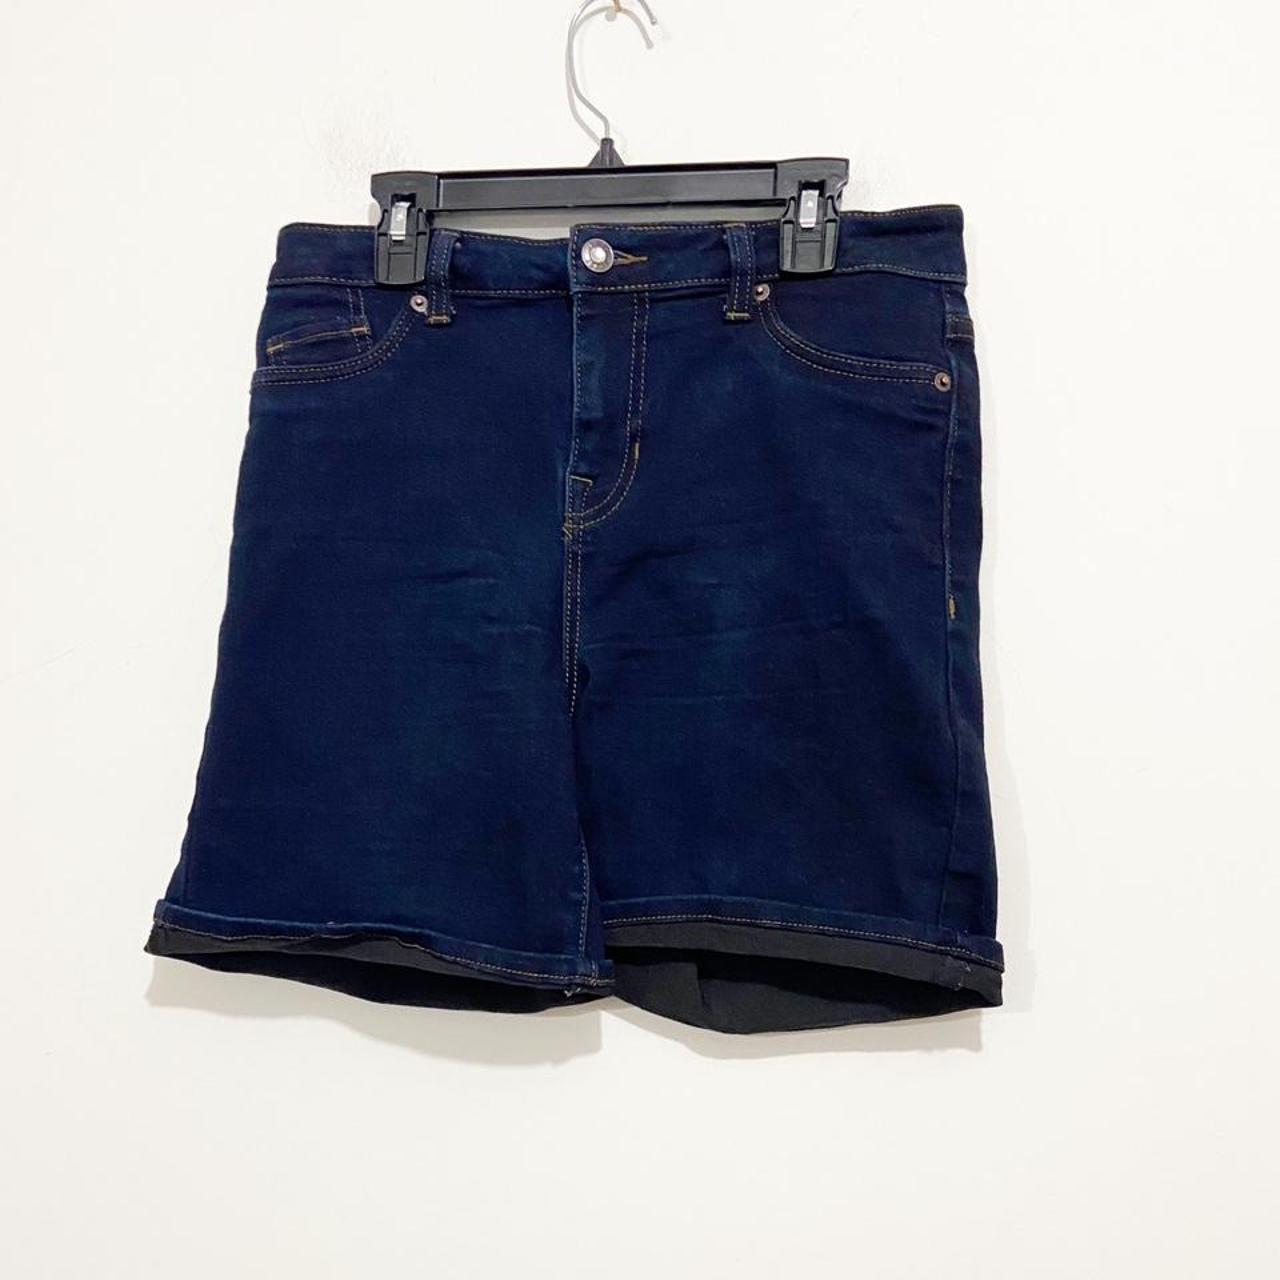 Product Image 1 - Faith Jeans Shorts. Stretch with